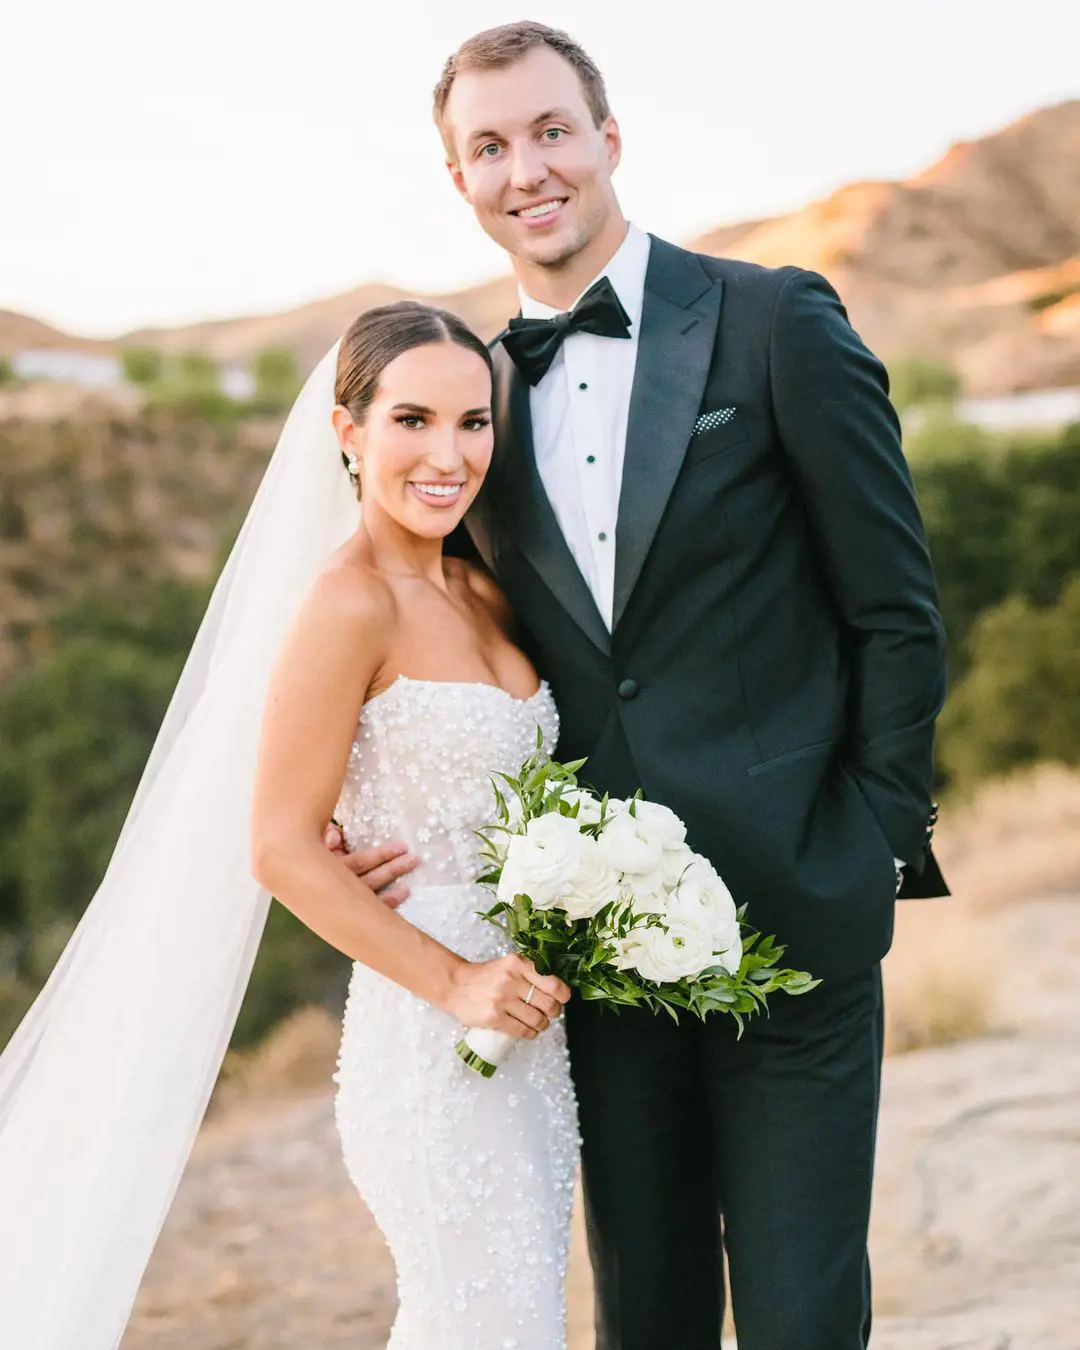 The couple tied the knot in Hummingbird Nest Ranch, California